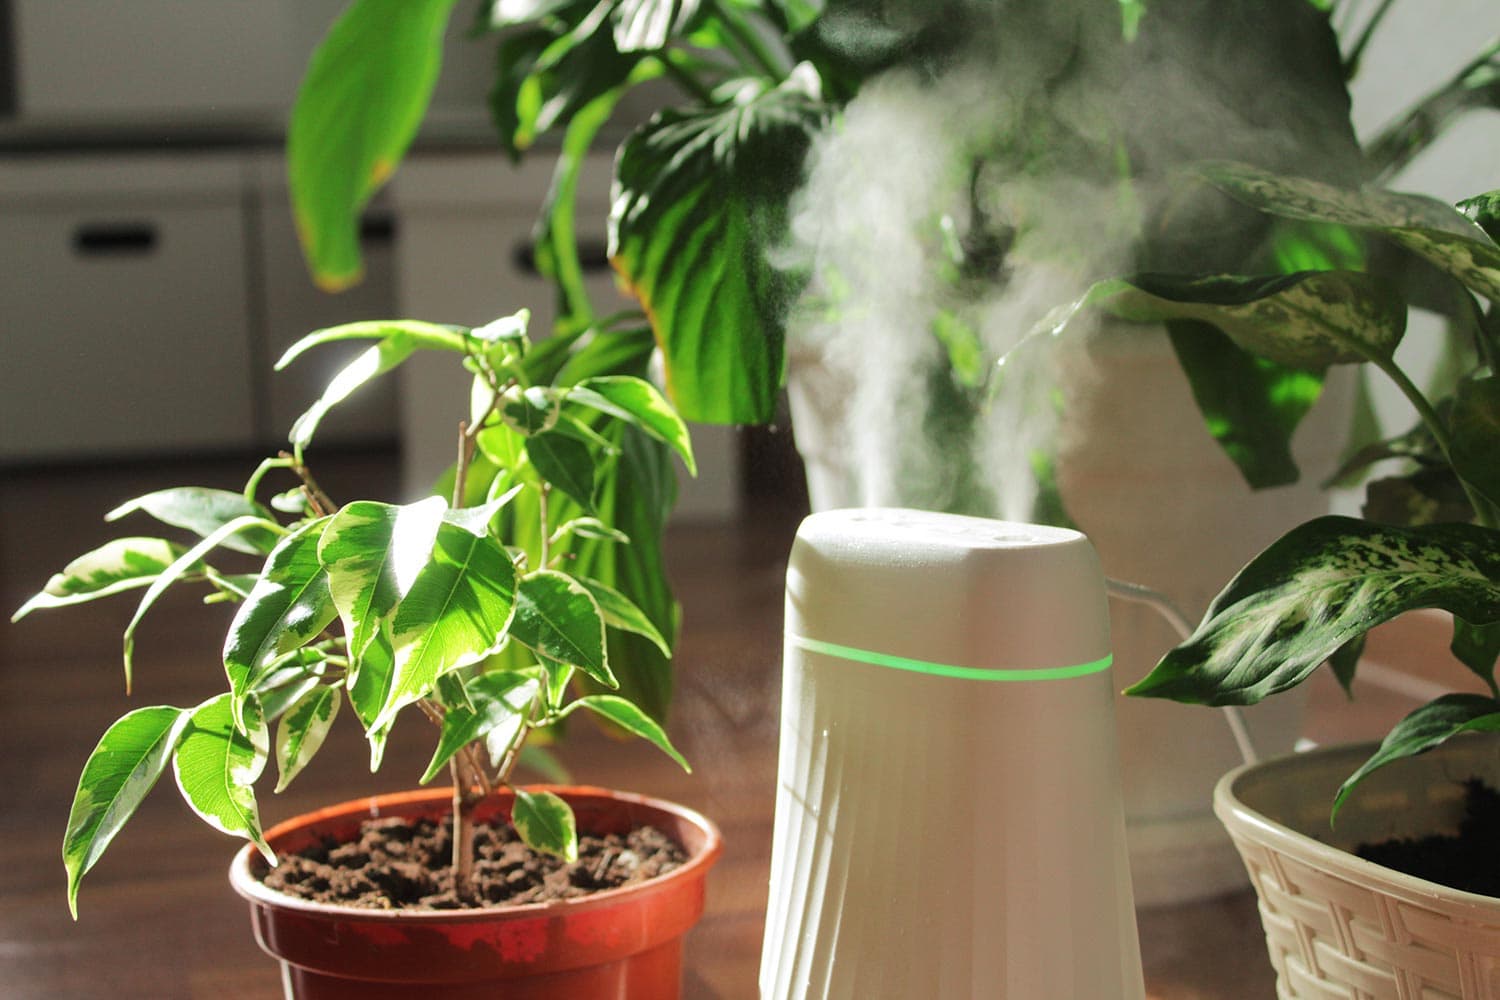 Humidifier and houseplants during the heating season